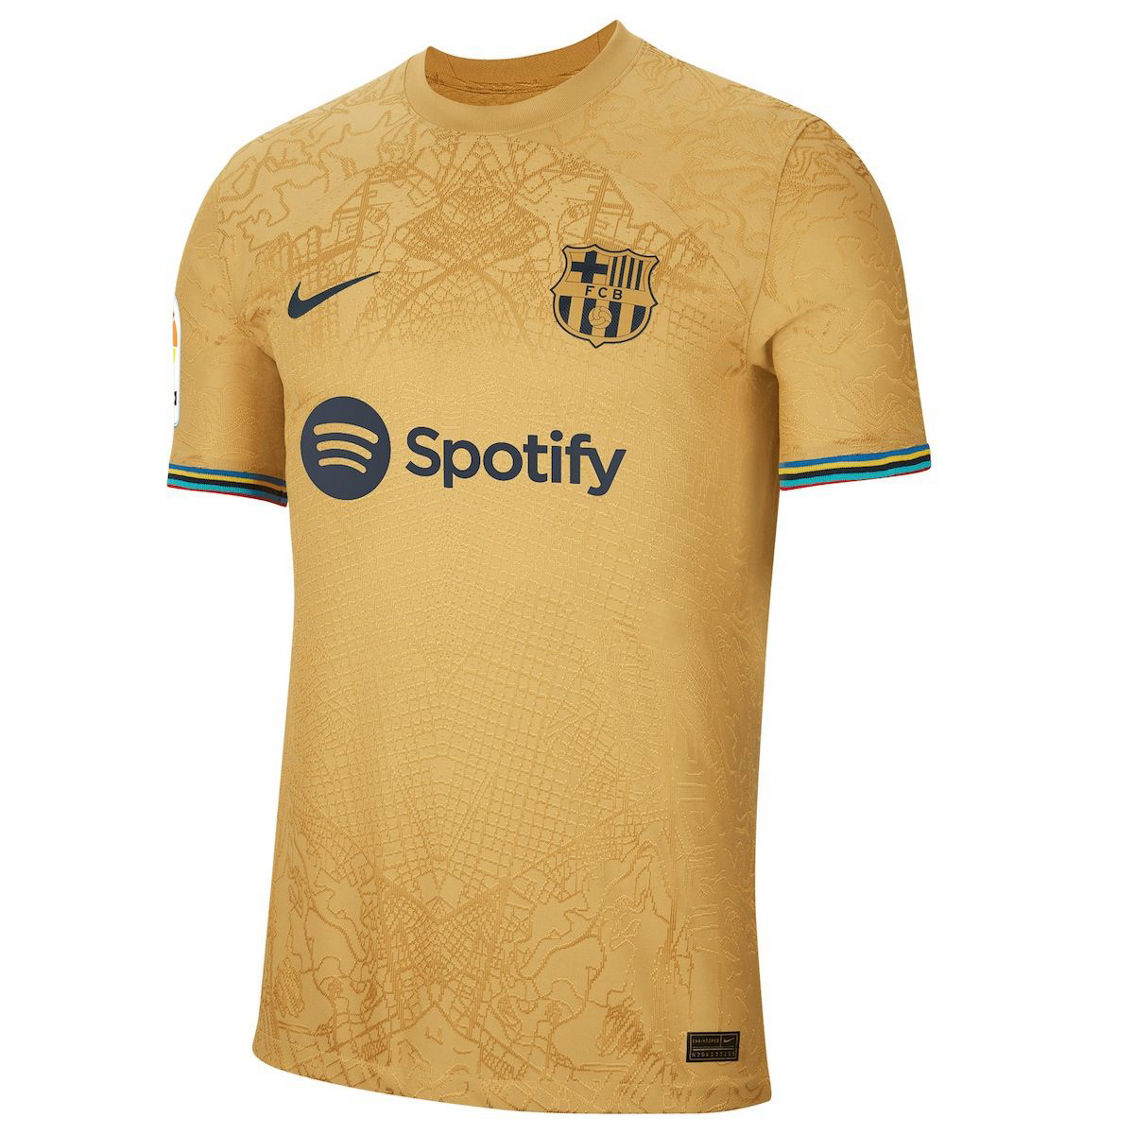 Nike Men's Pedri Gold Barcelona 2022/23 Away Authentic Player Jersey - Image 3 of 4